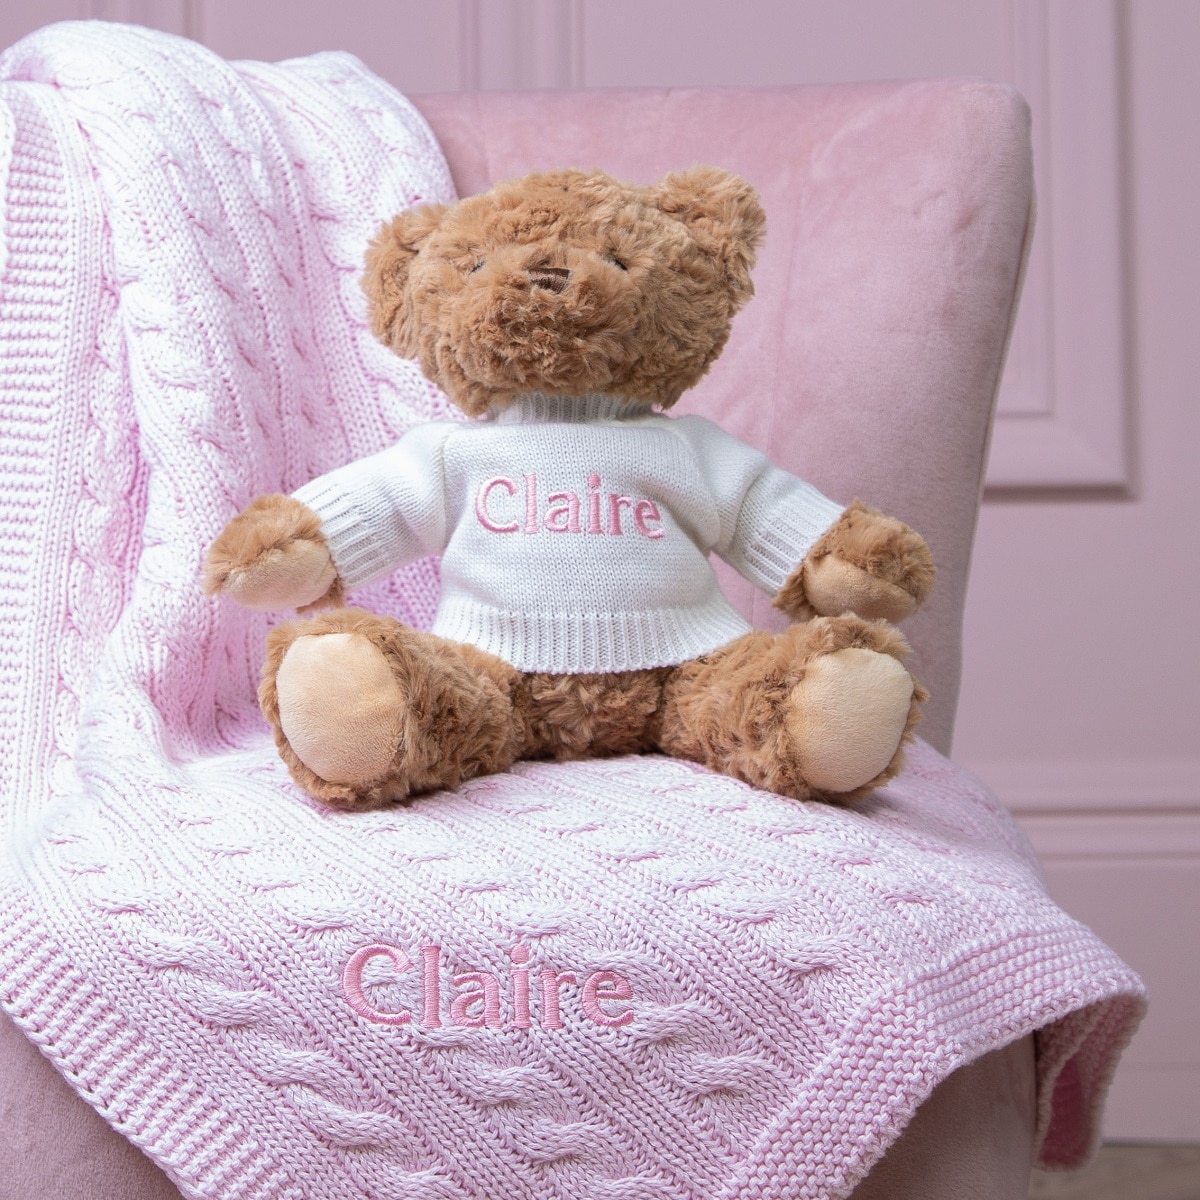 Personalised Toffee Moon luxury cable baby blanket and Keel keeleco bear gift set